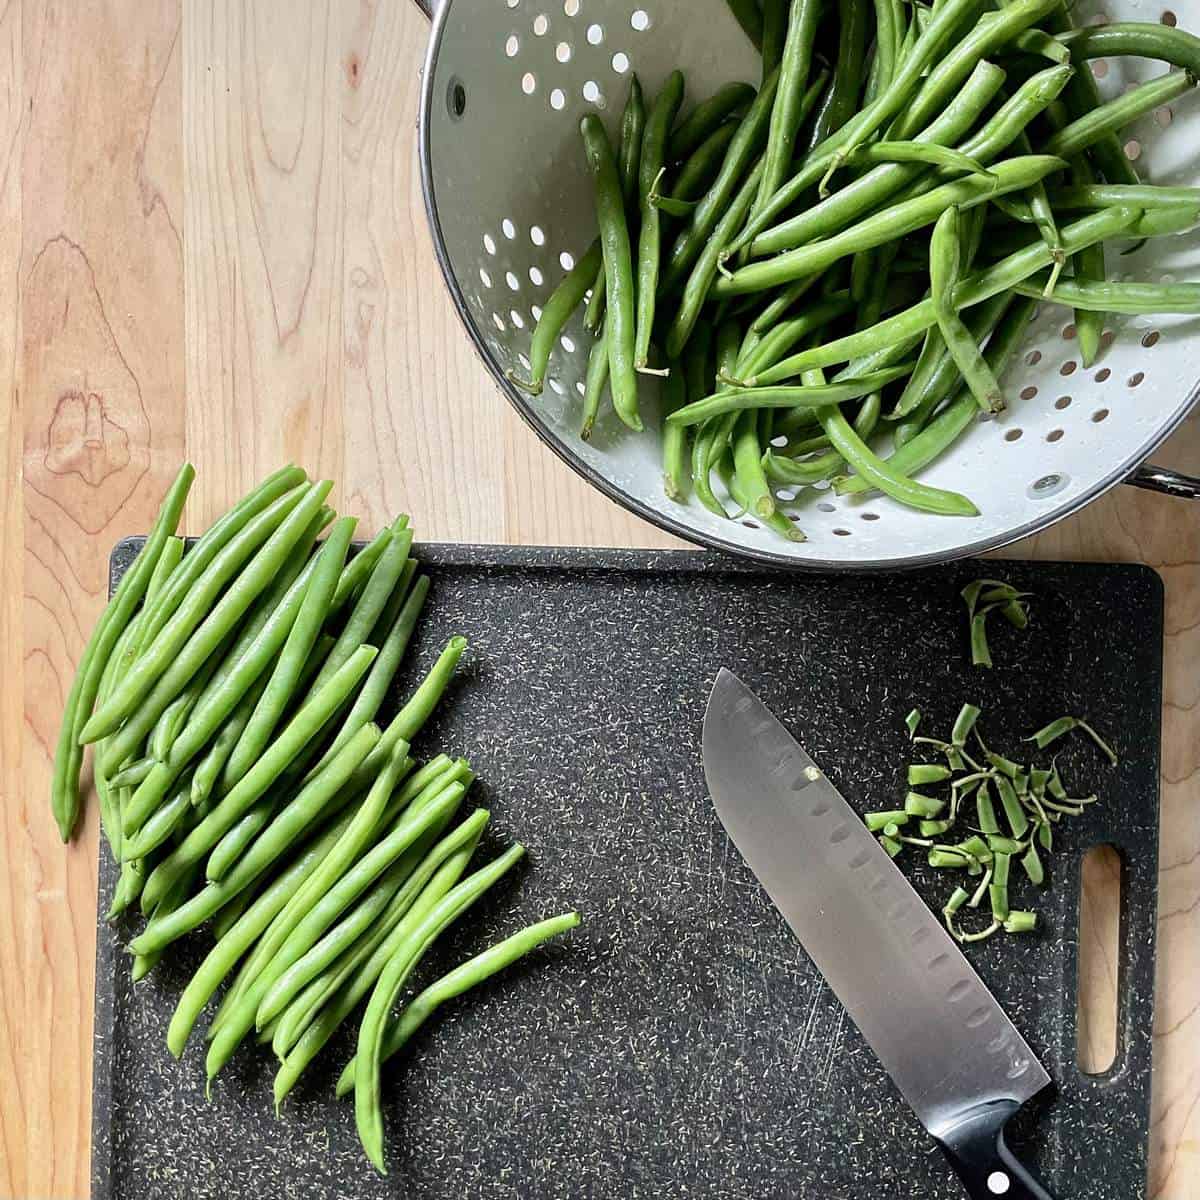 Trimmed grean beans on a cutting board.